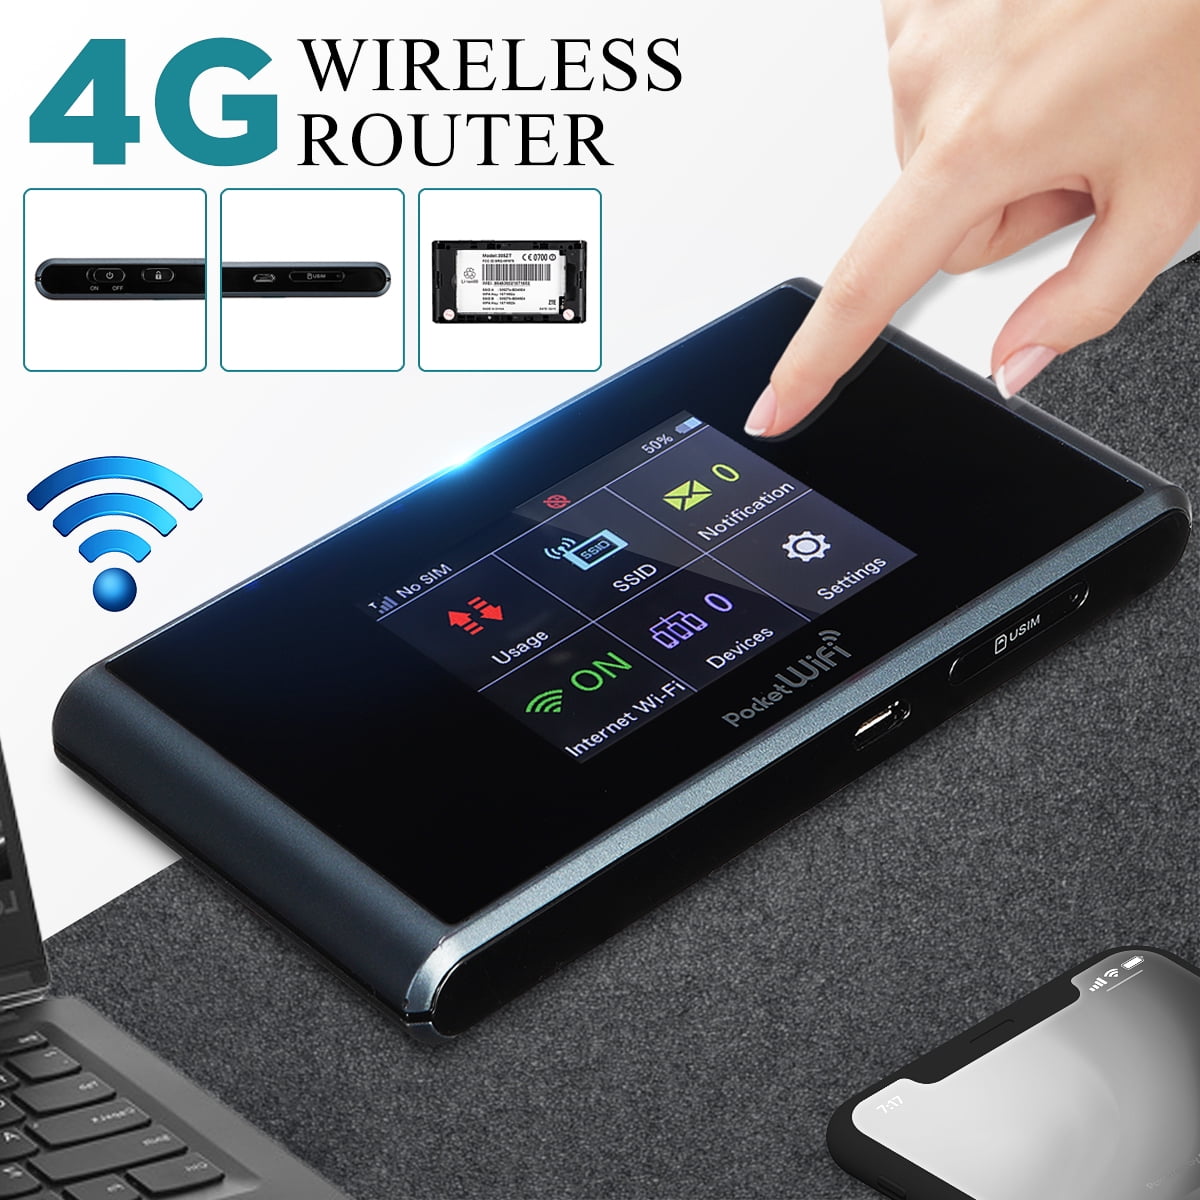 Portable 4G Wifi Router Mobile Hotspot Wireless Router Support SIM Card